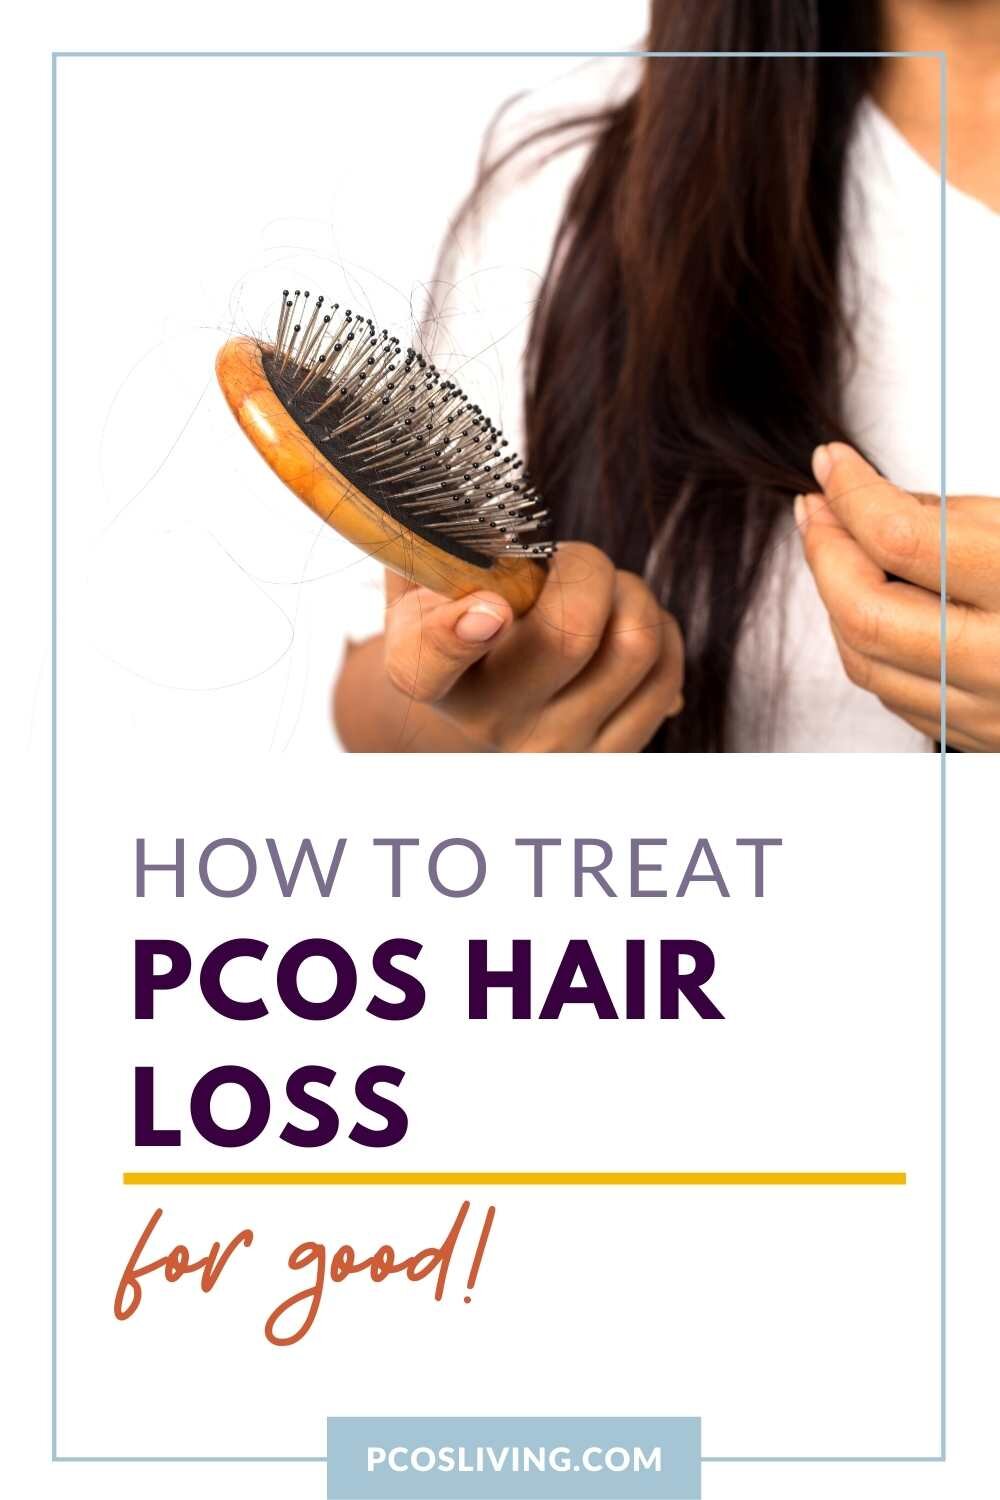 PCOS [Polycystic Ovarian Syndrome] and Hair Loss - What To Do